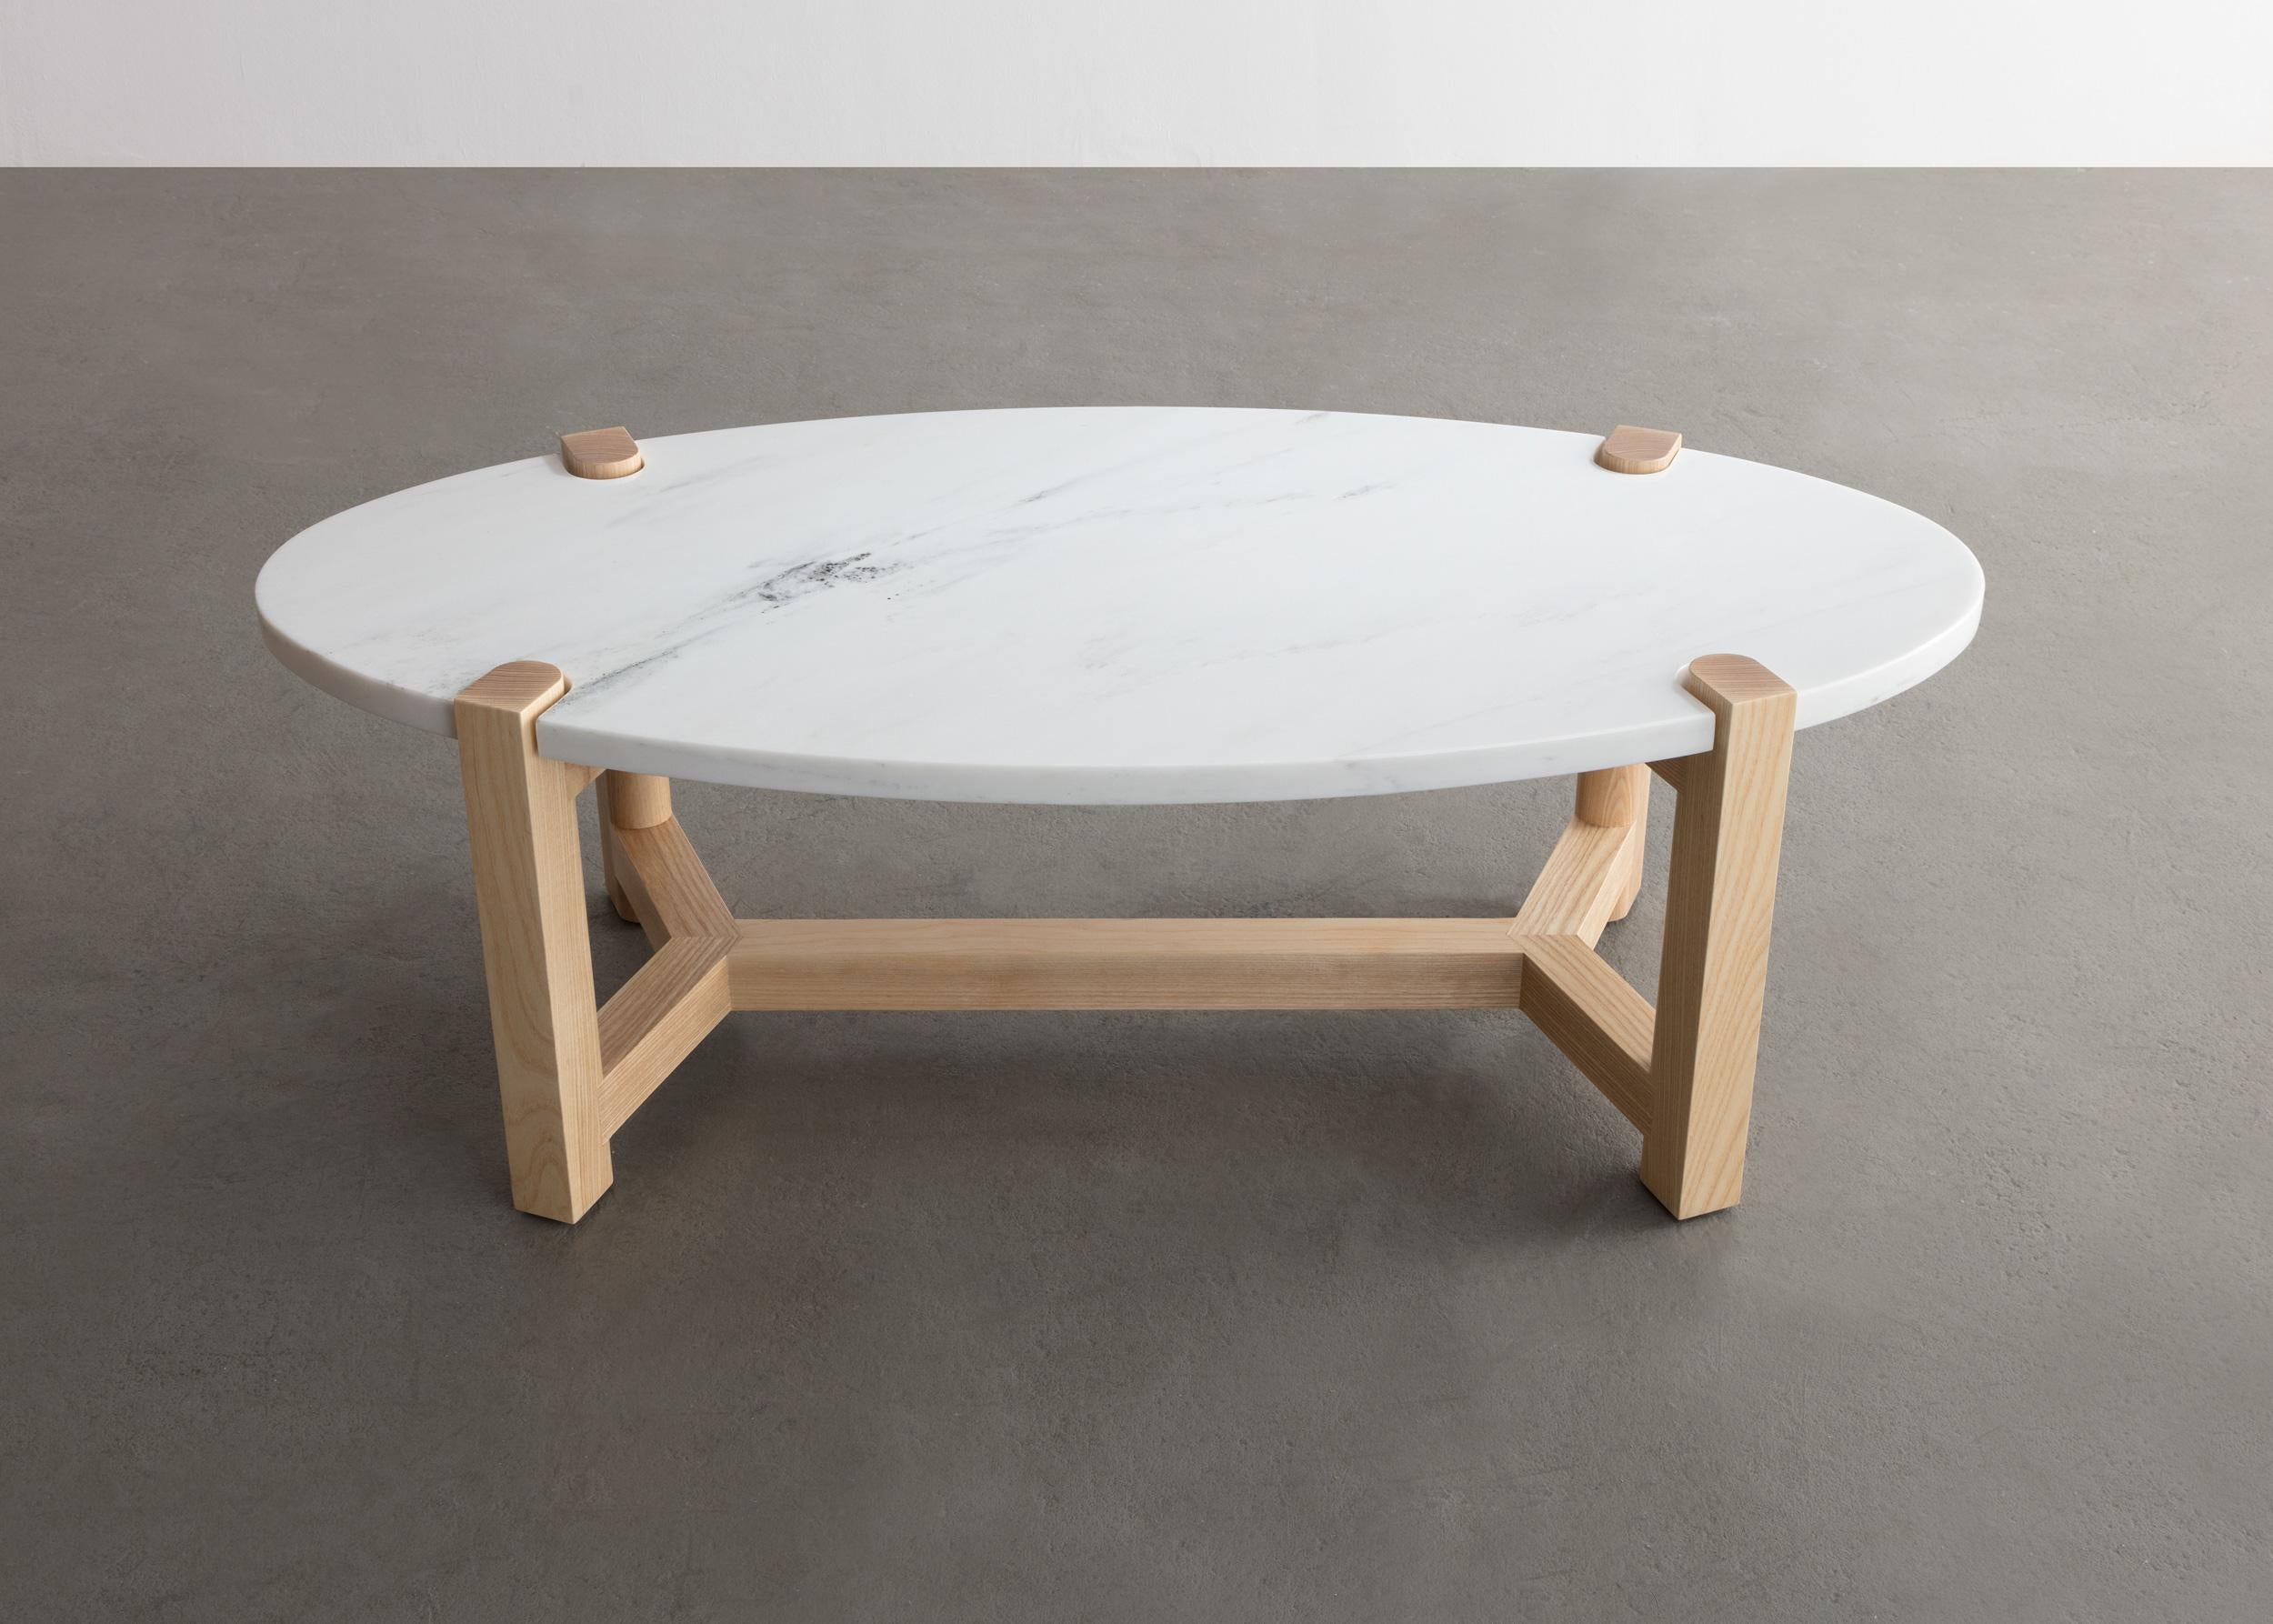 Here details and connections become the focus at the intersection of surface and structure.

Frame shown in ash and also available in cherry, maple, or walnut. 
Top shown in white Danby marble and also available in custom stone and material upon